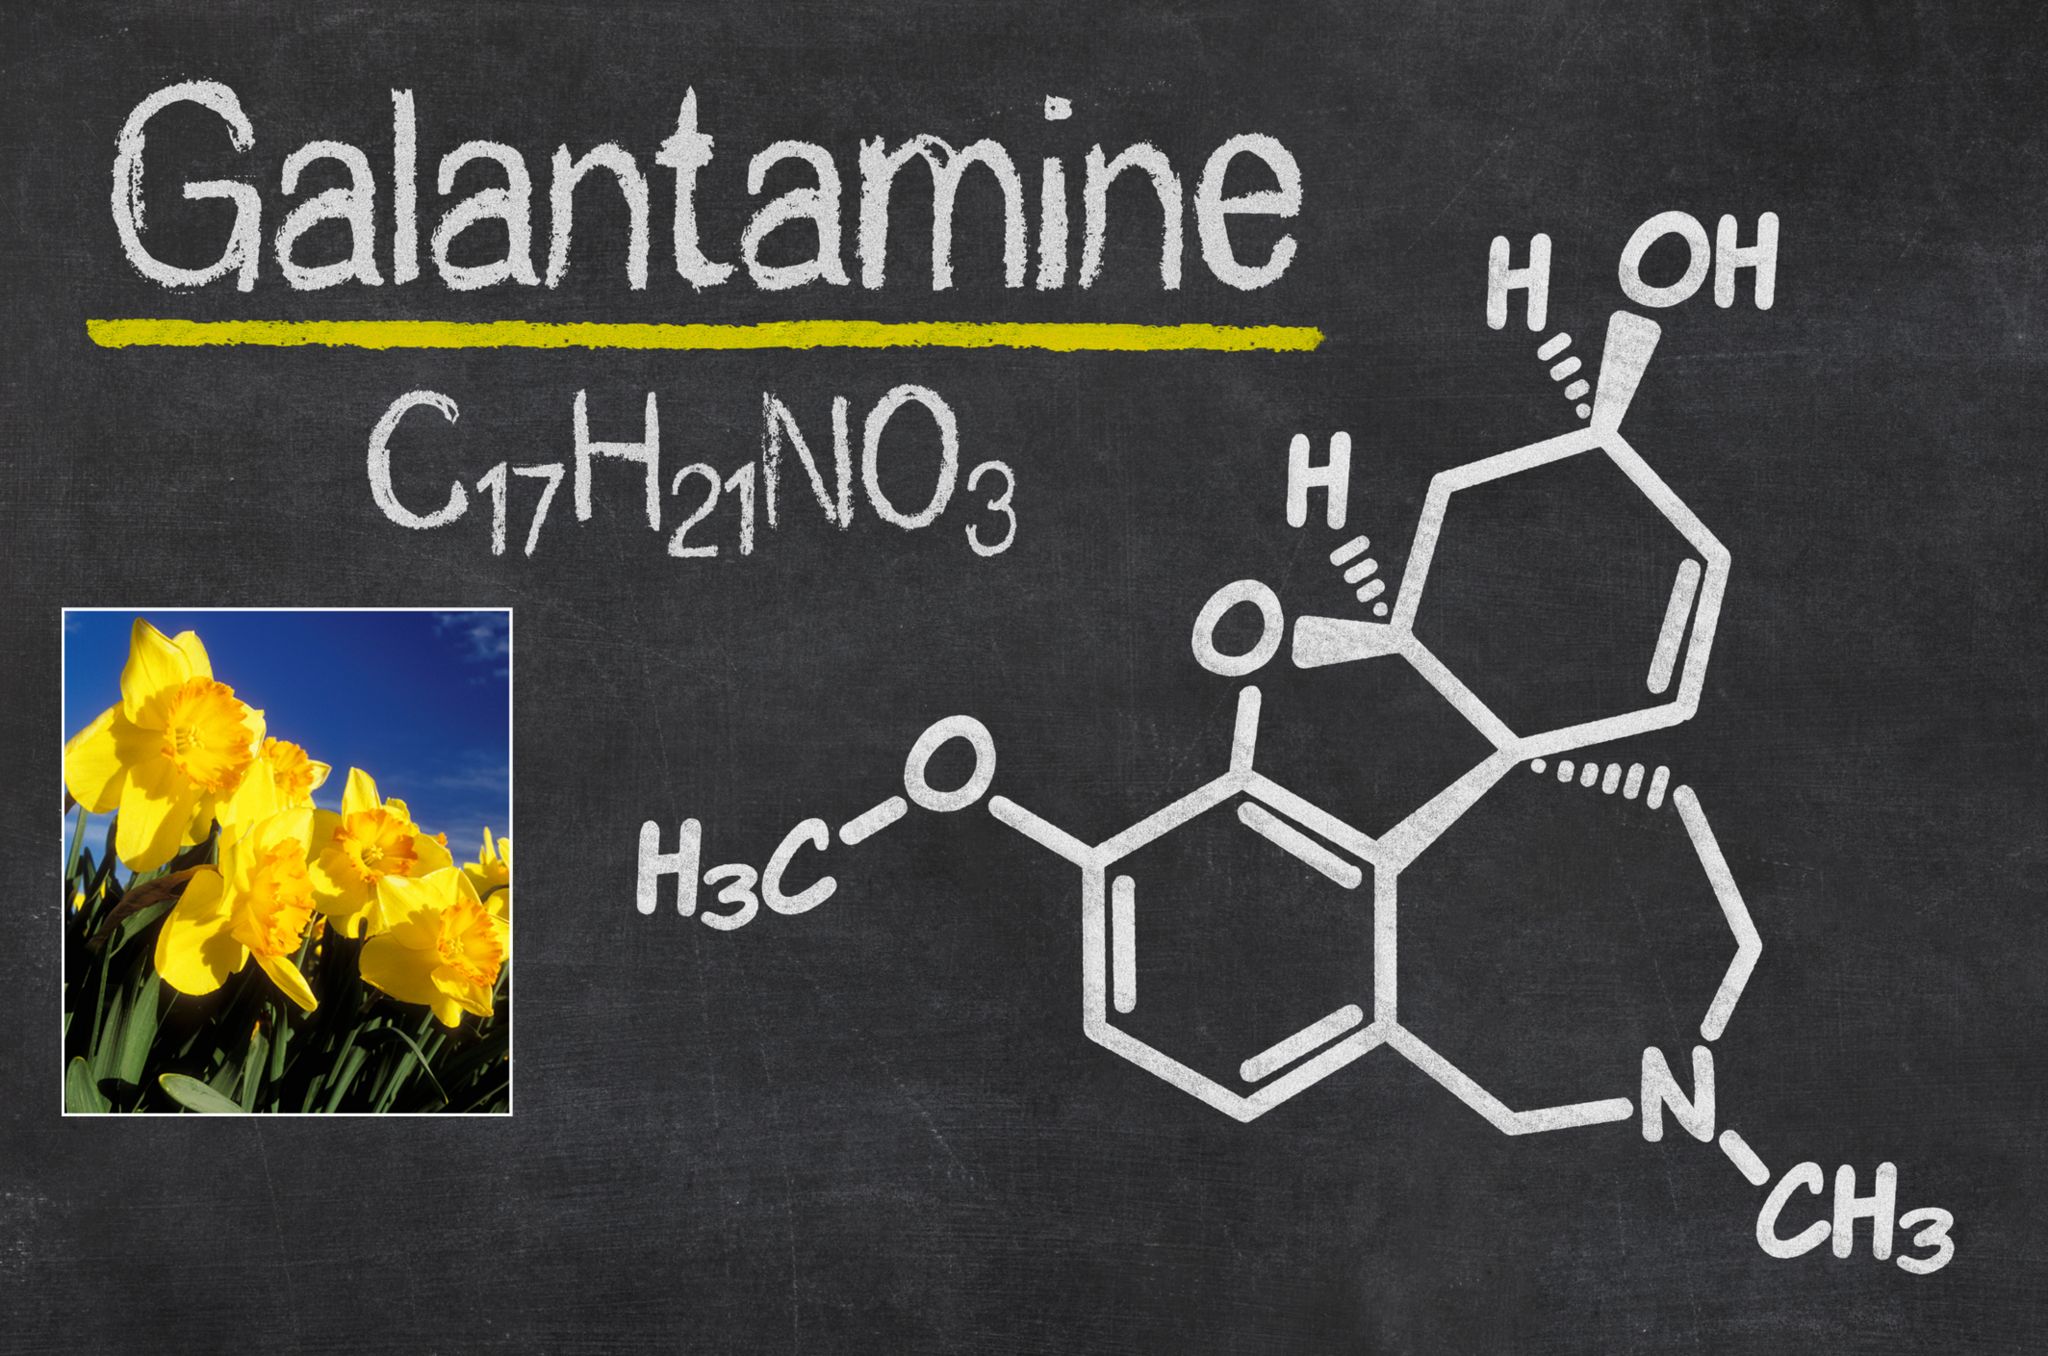 The chemical formula of Galantamine and daffodils (inset)